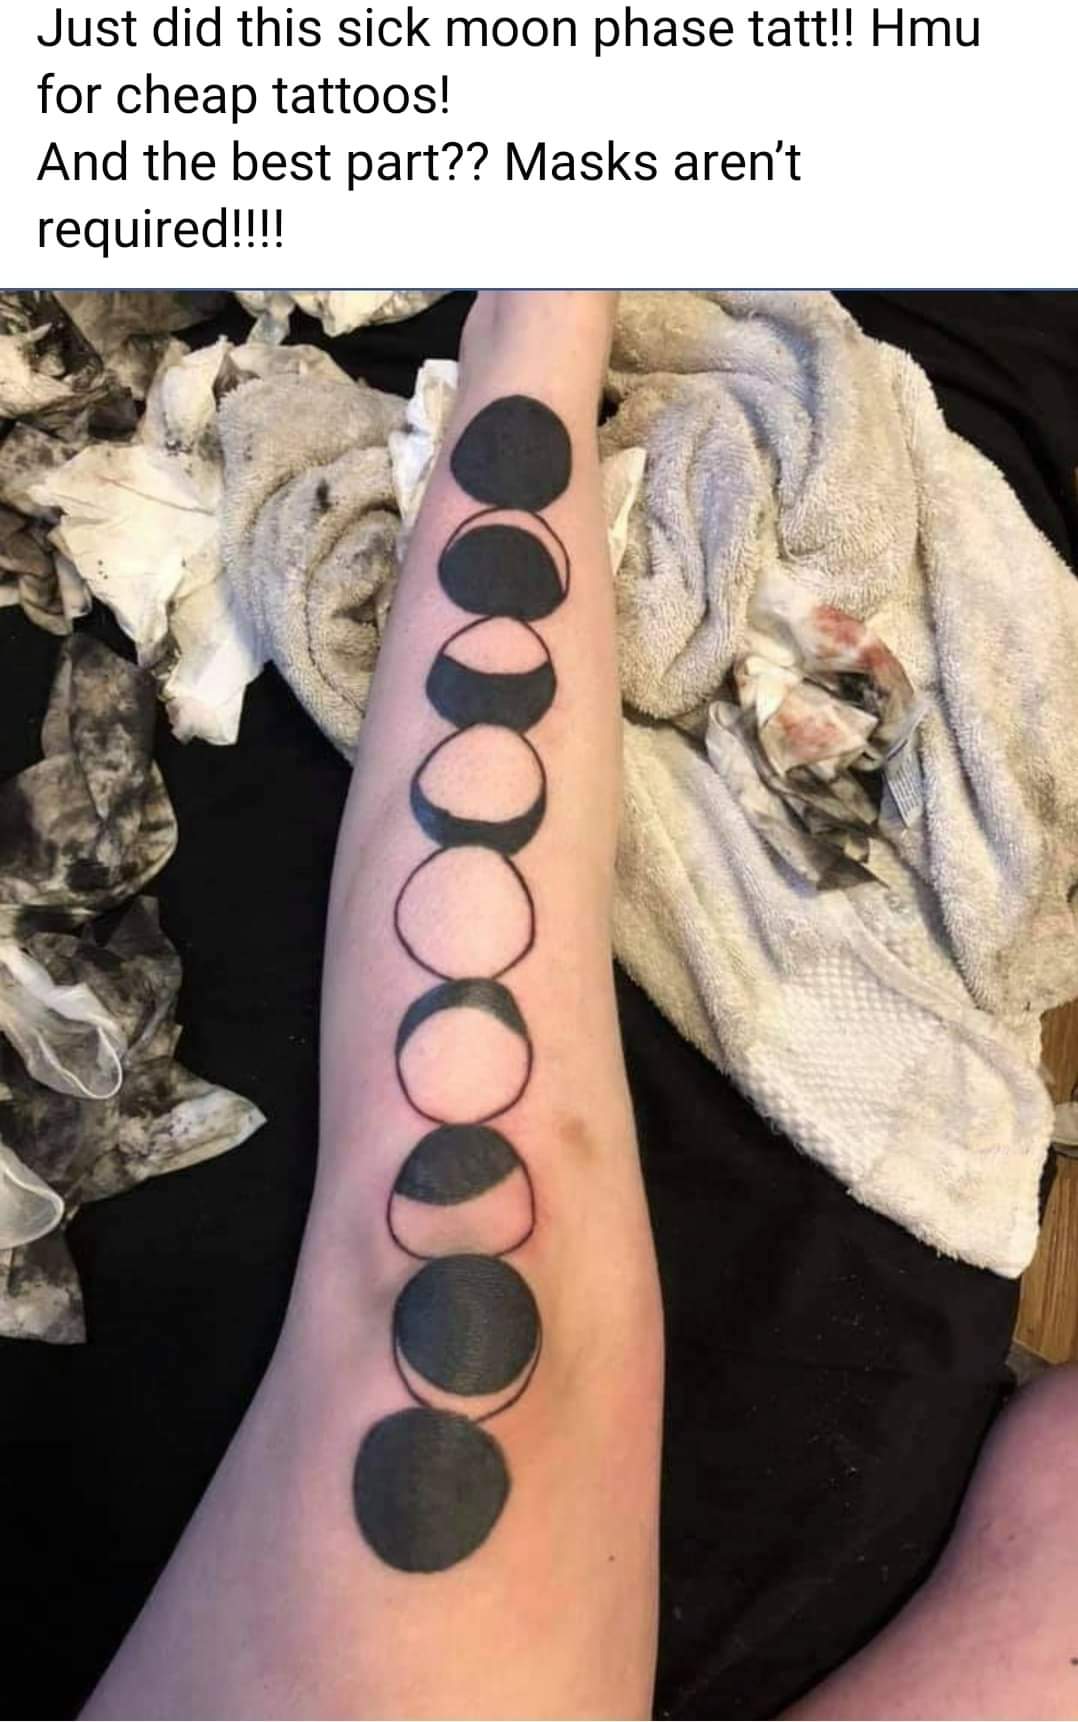 failed circle tattoo - Just did this sick moon phase tatt!! Hmu for cheap tattoos! And the best part?? Masks aren't required!!!! 000